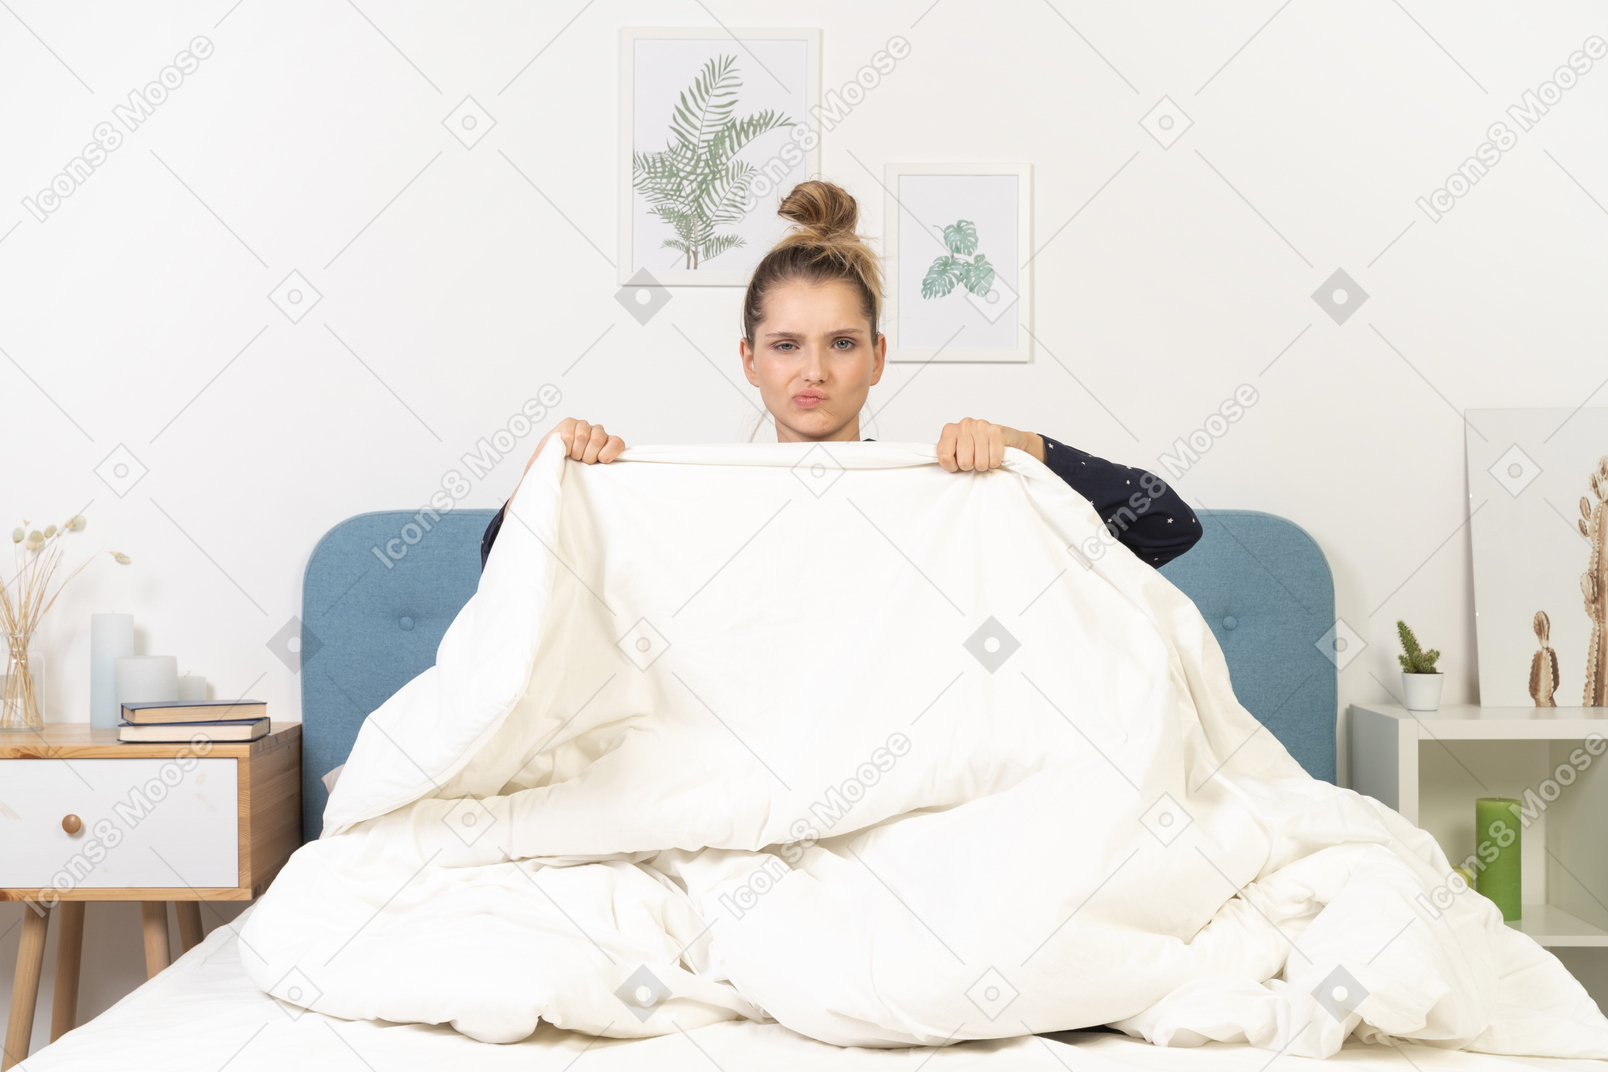 Front view of a grimacing young woman in pajamas hiding behind the blanket staying in bed